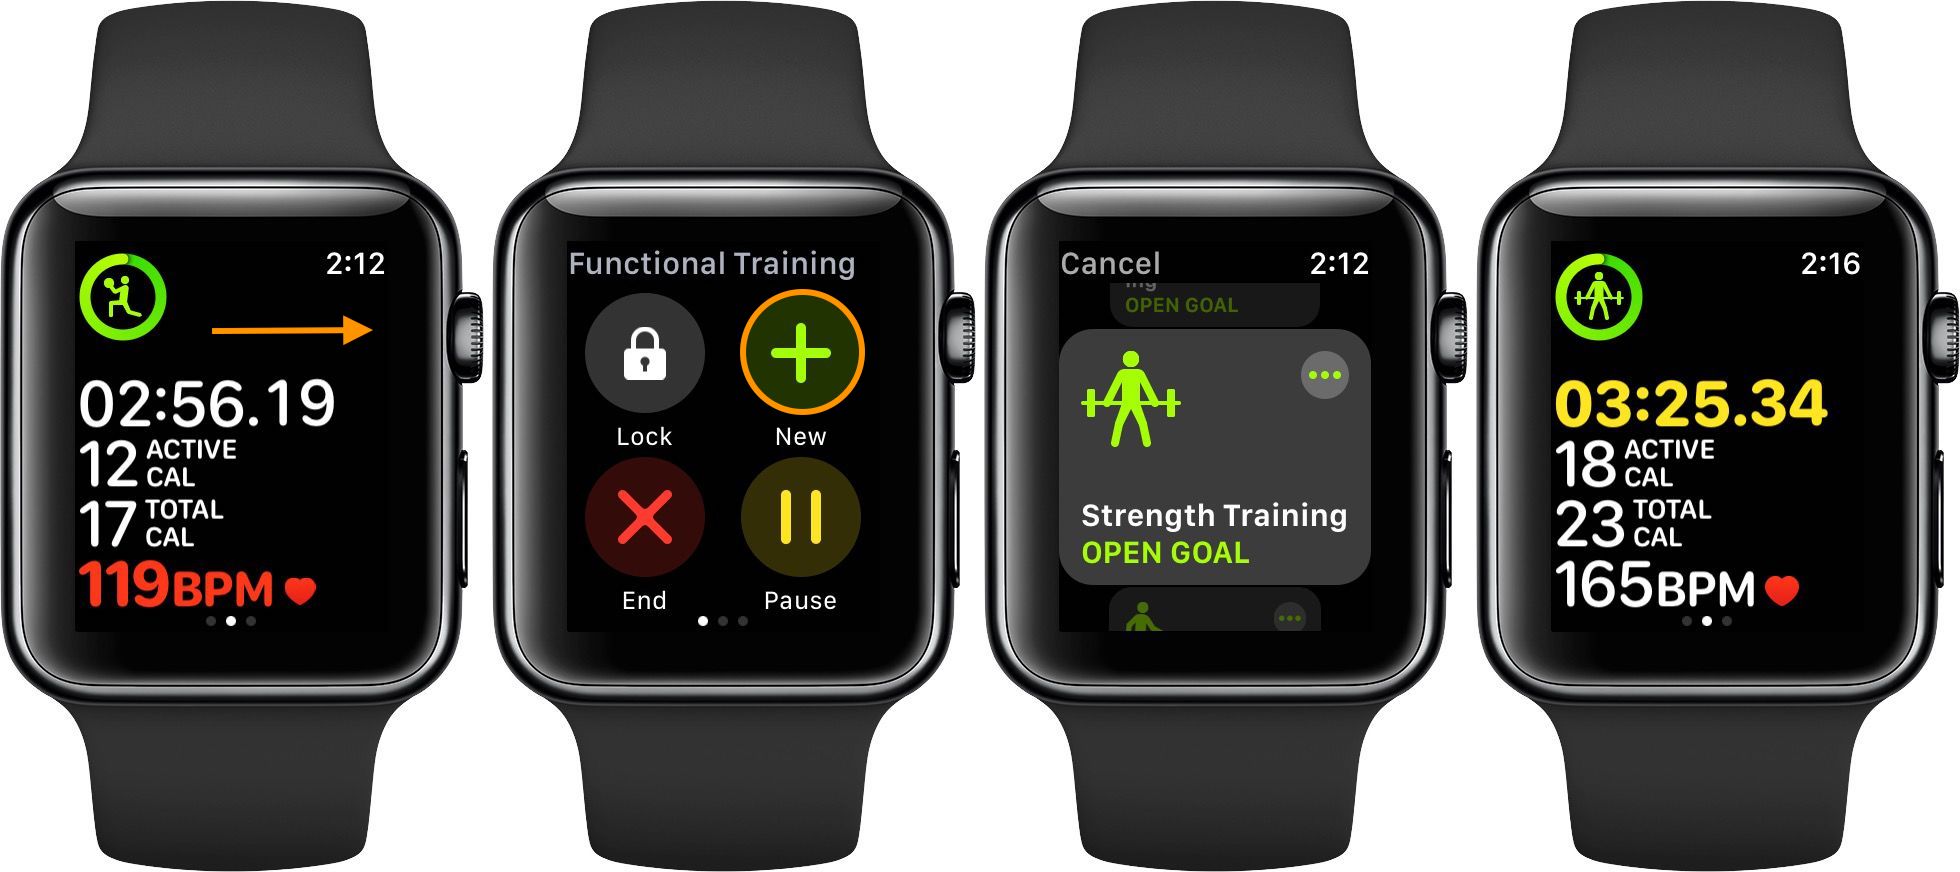 apple watch pauses during workout